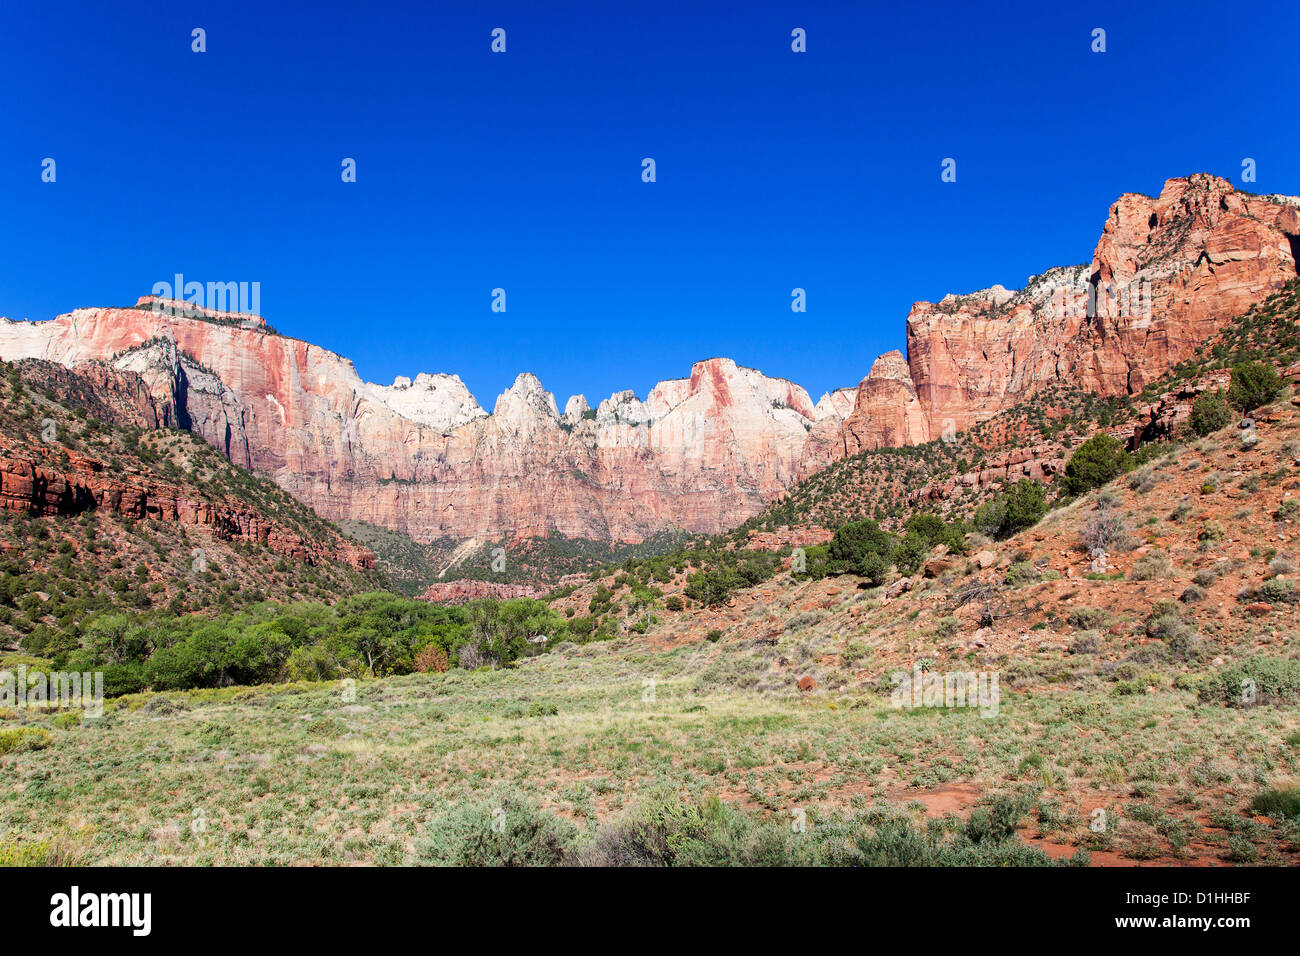 Towers of the Virgin, Zion NP, Utah Stock Photo